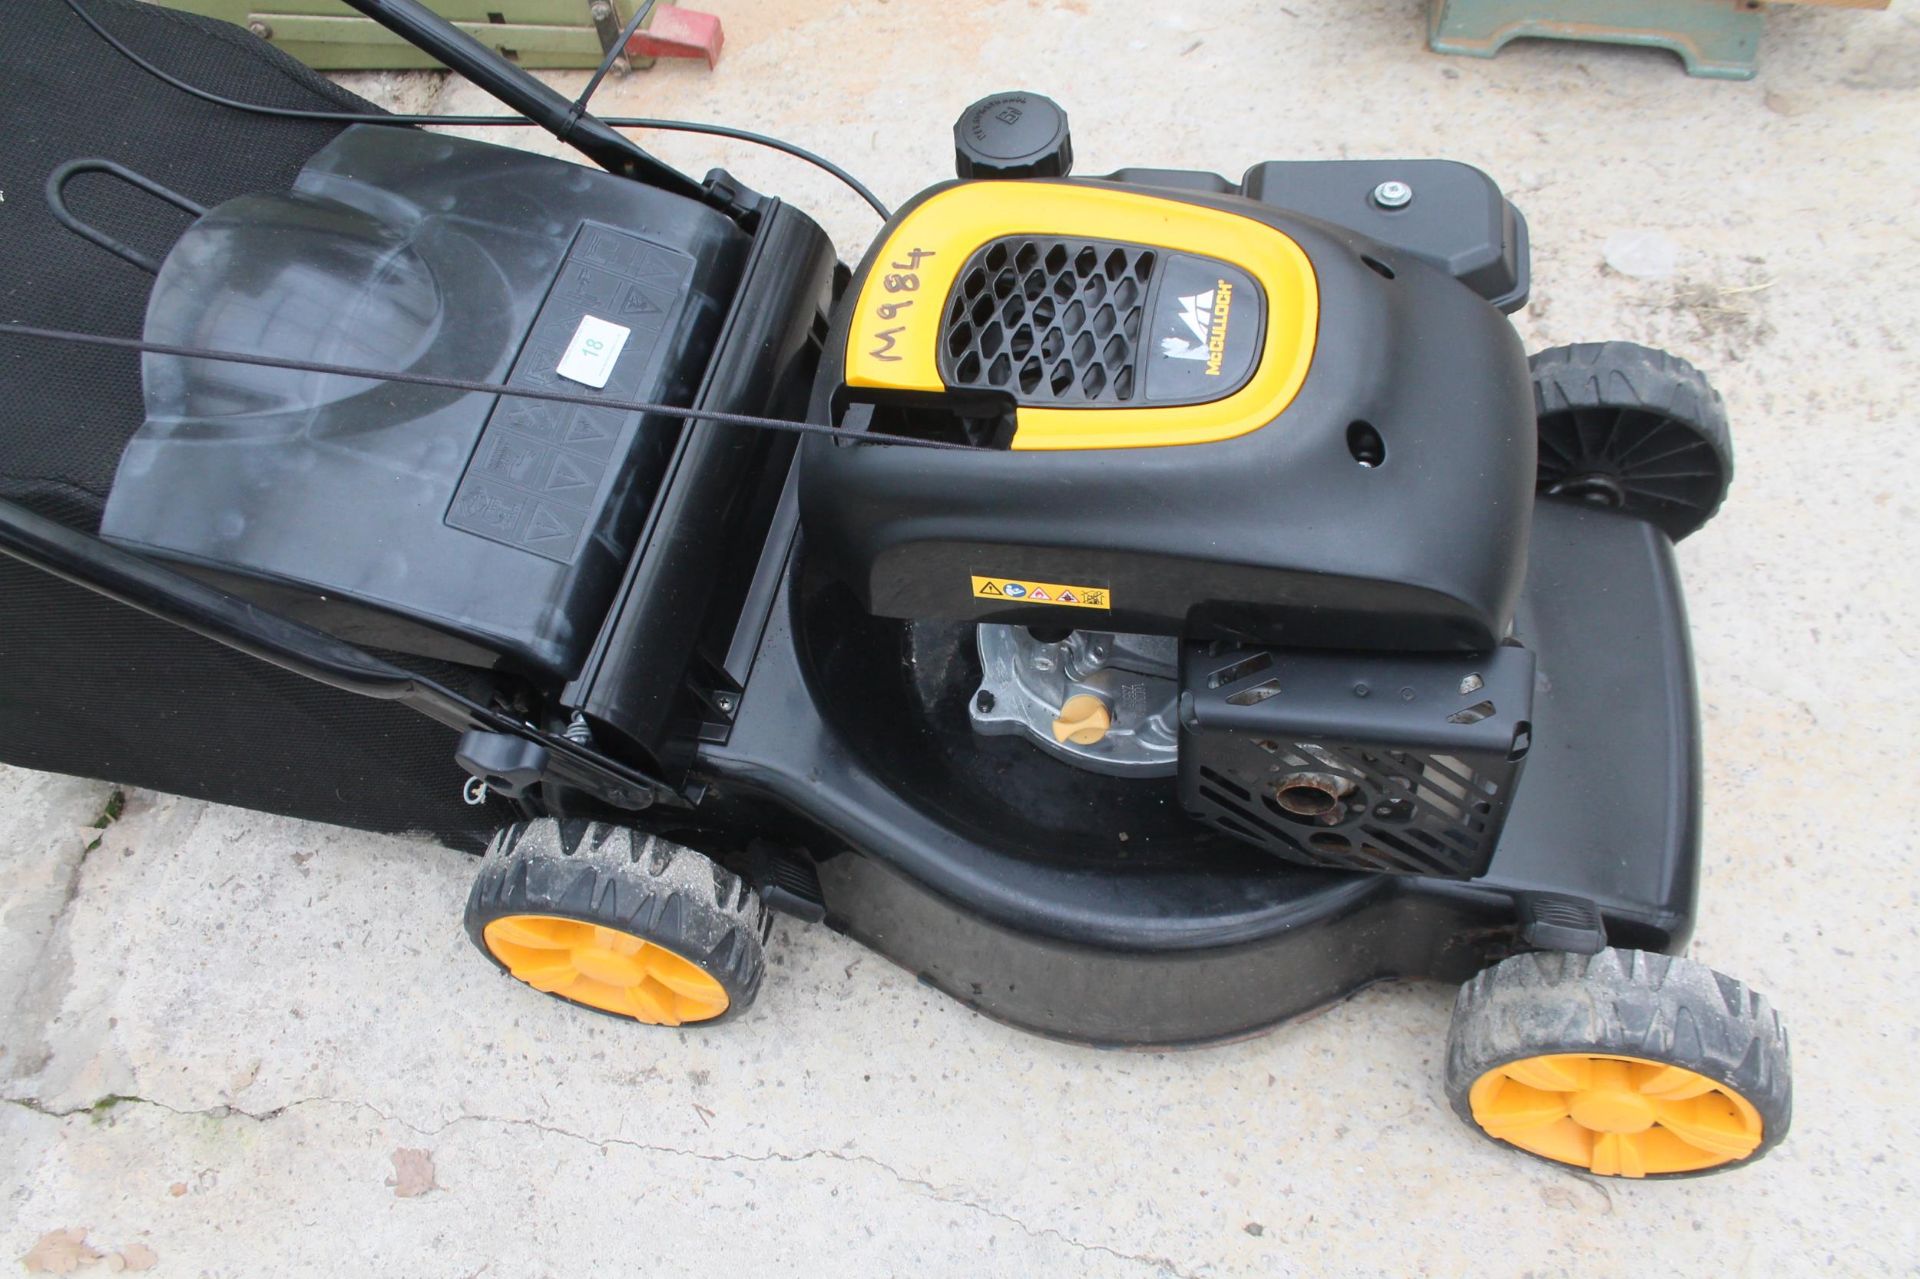 McCULLOCH LAWN MOWER IN WORKING ORDER NO VAT - Image 2 of 2